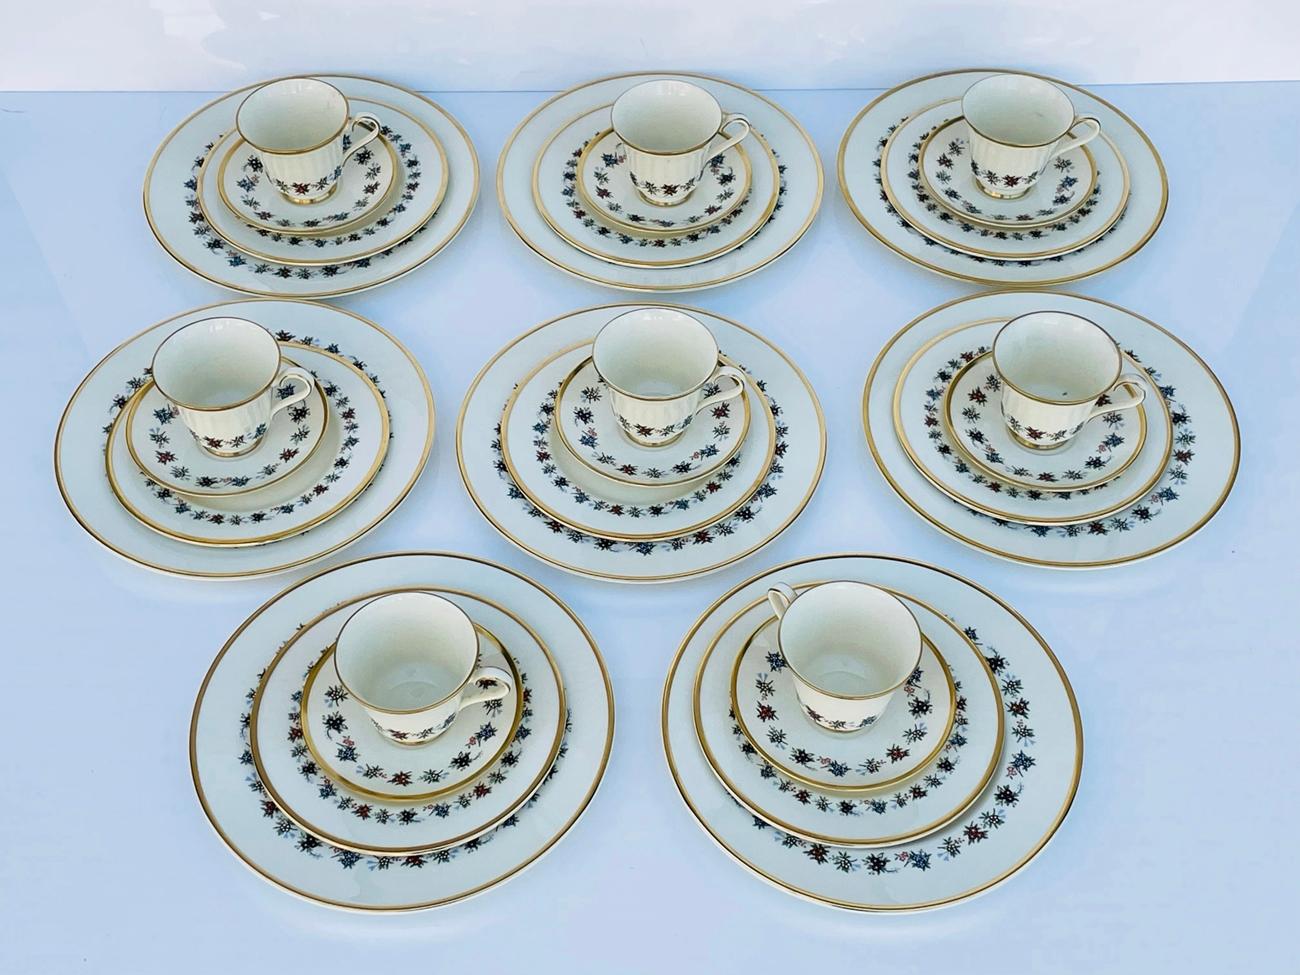 Materials: Bone china
Marks: Maker’s Mark
Origin: England
Pattern: Mirabeau

This is a set of 8 dining plates, 8 bread or salad plates, 8 saucers and 8 cups.
All of the pieces are marked and show well.
Measurements:
Dinner plates: 10.75